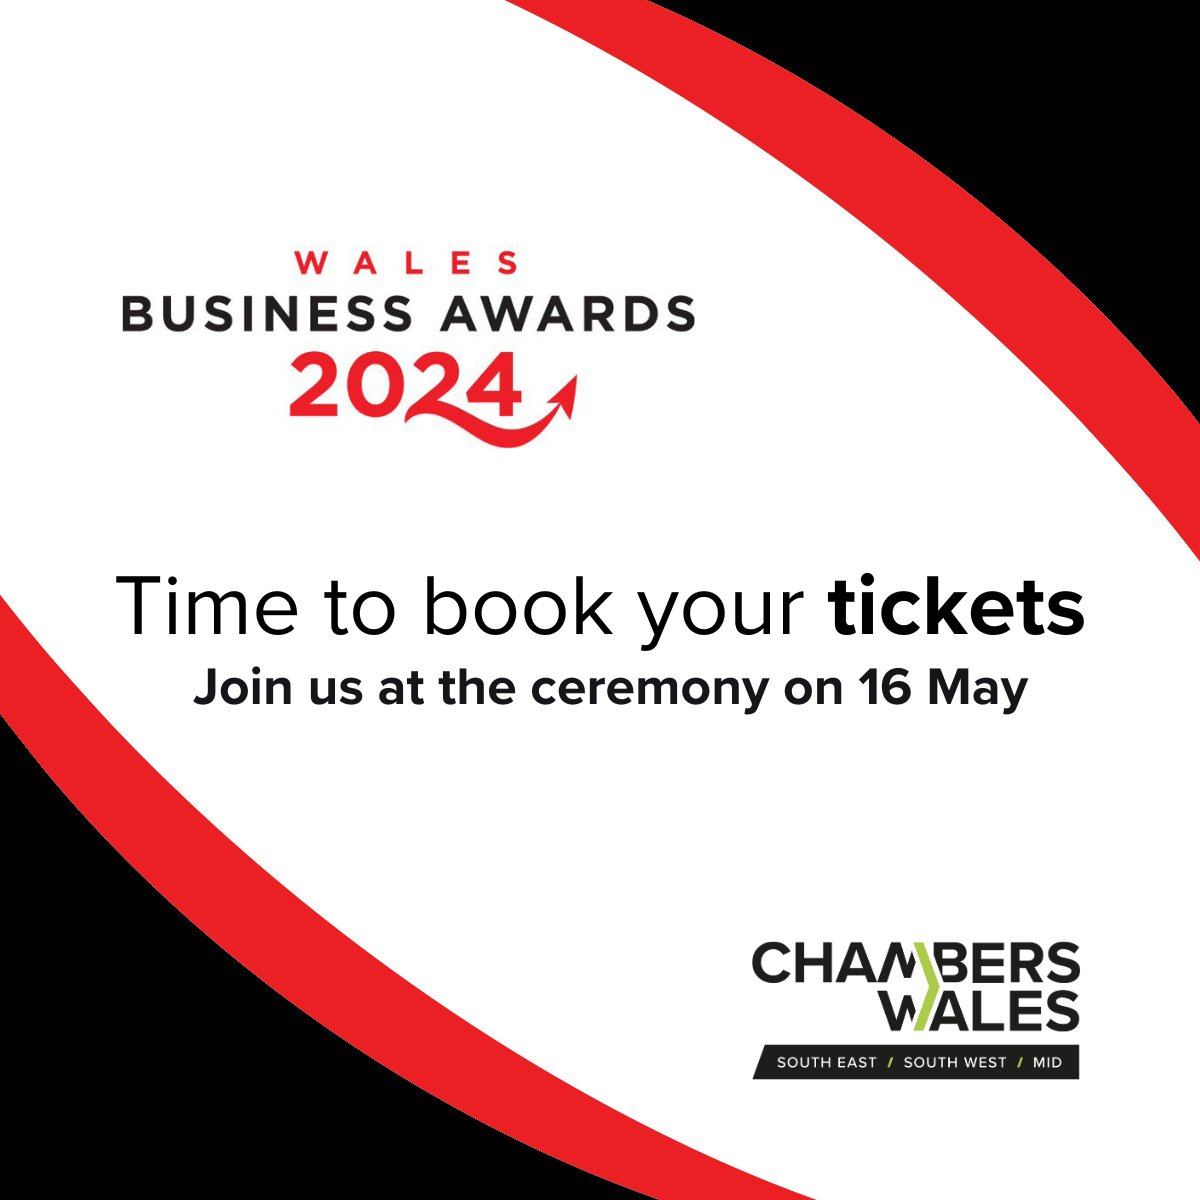 Host @AndreaByrneTV will be revealing the winners of the #WalesBusinessAwards at our ceremony on 16 May. Time to book your tickets and tables to join us: cw-seswm.com/events/awards-…